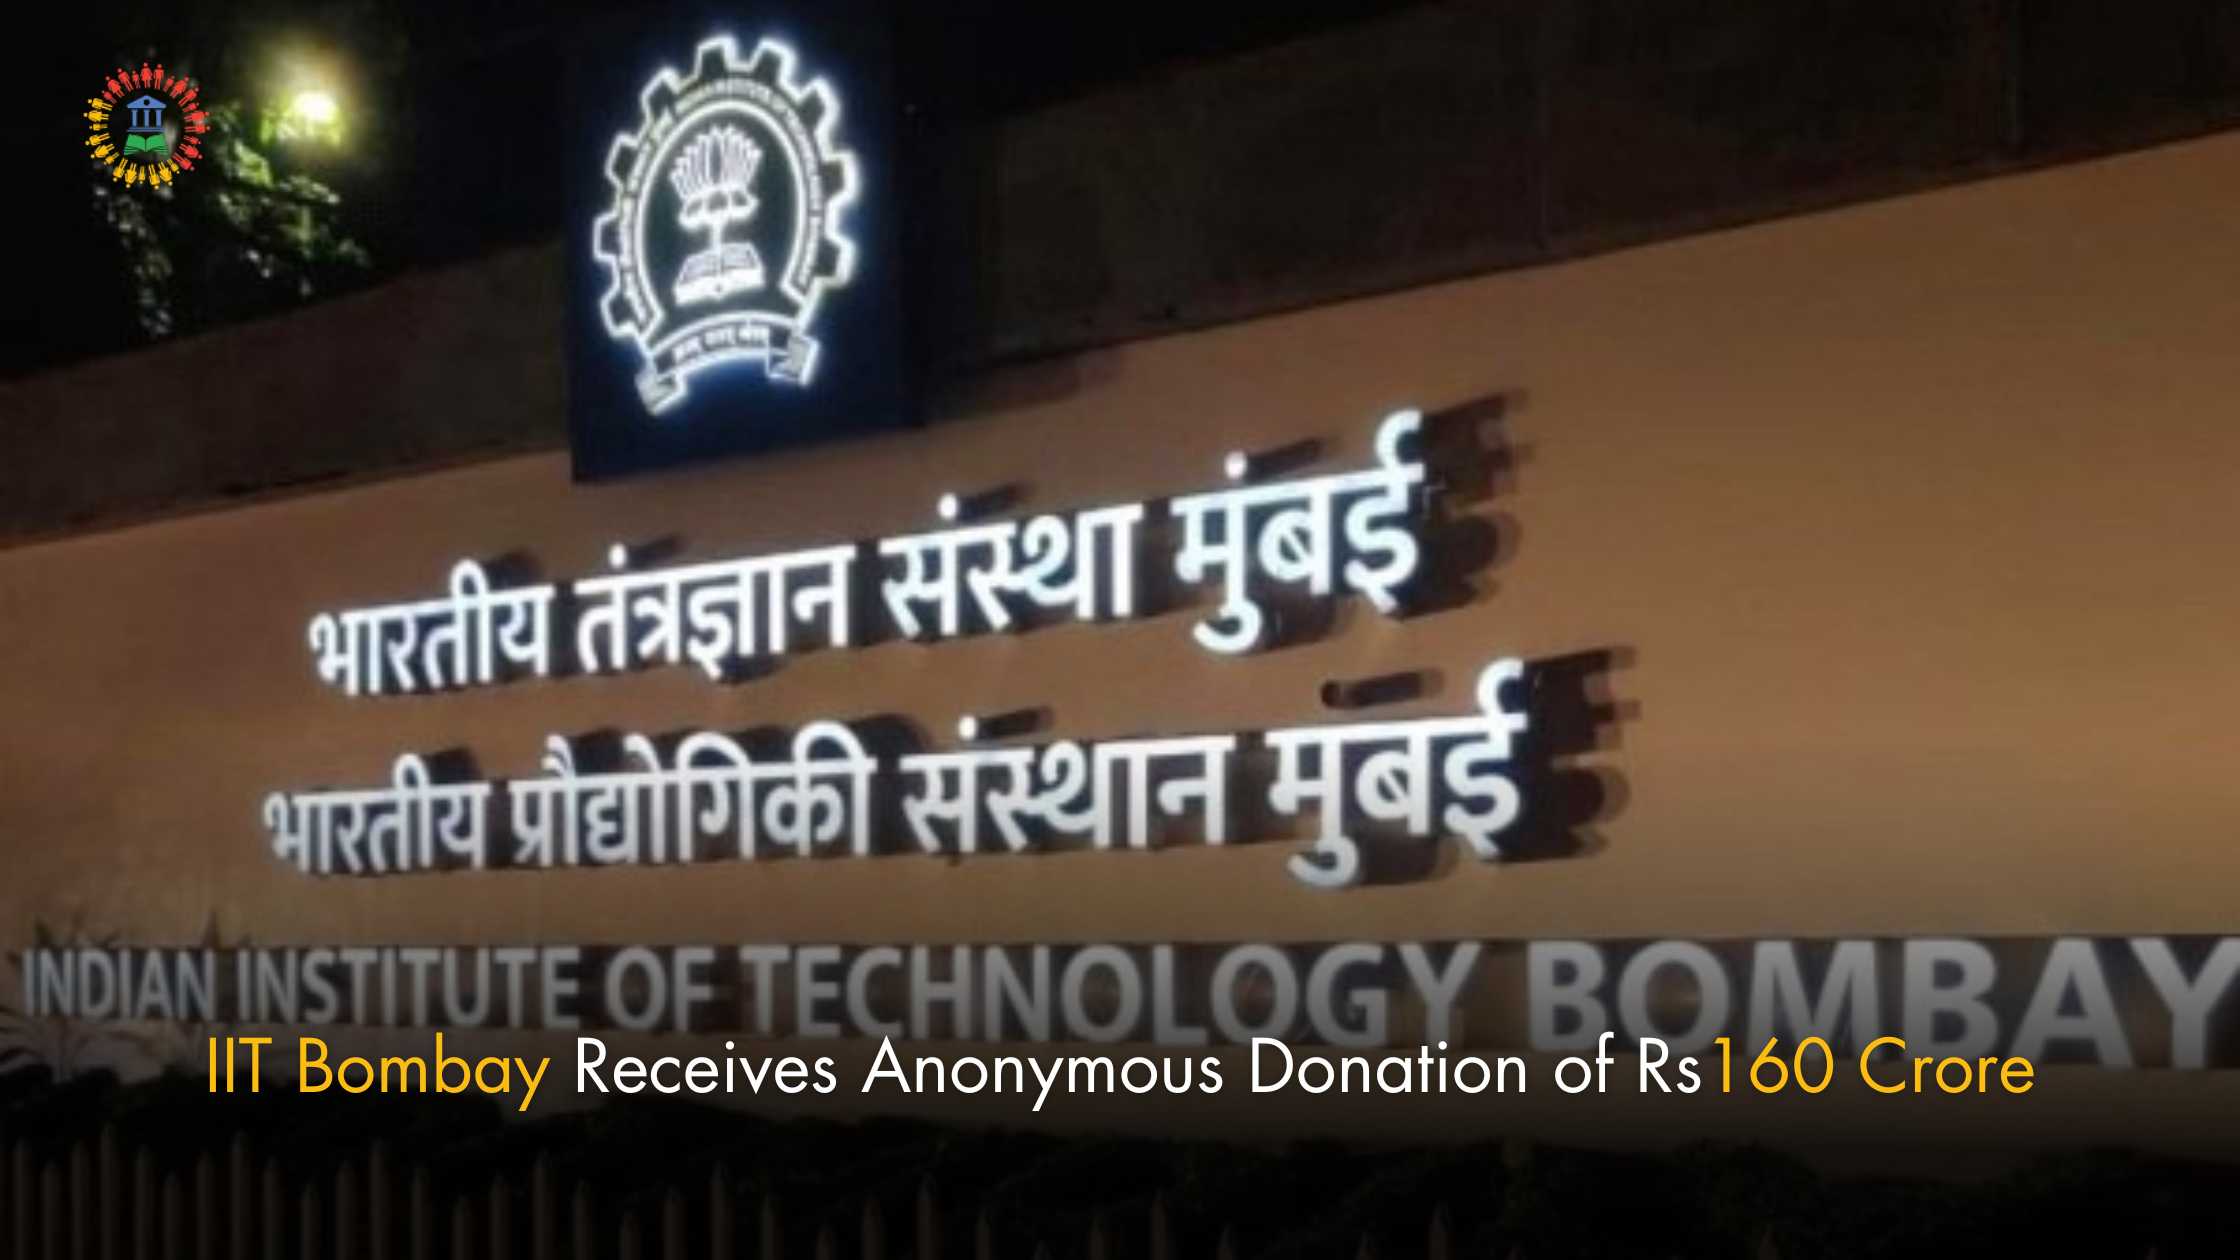 IIT Bombay Receives Anonymous Donation of Rs 160 Crore - The Alma Mater